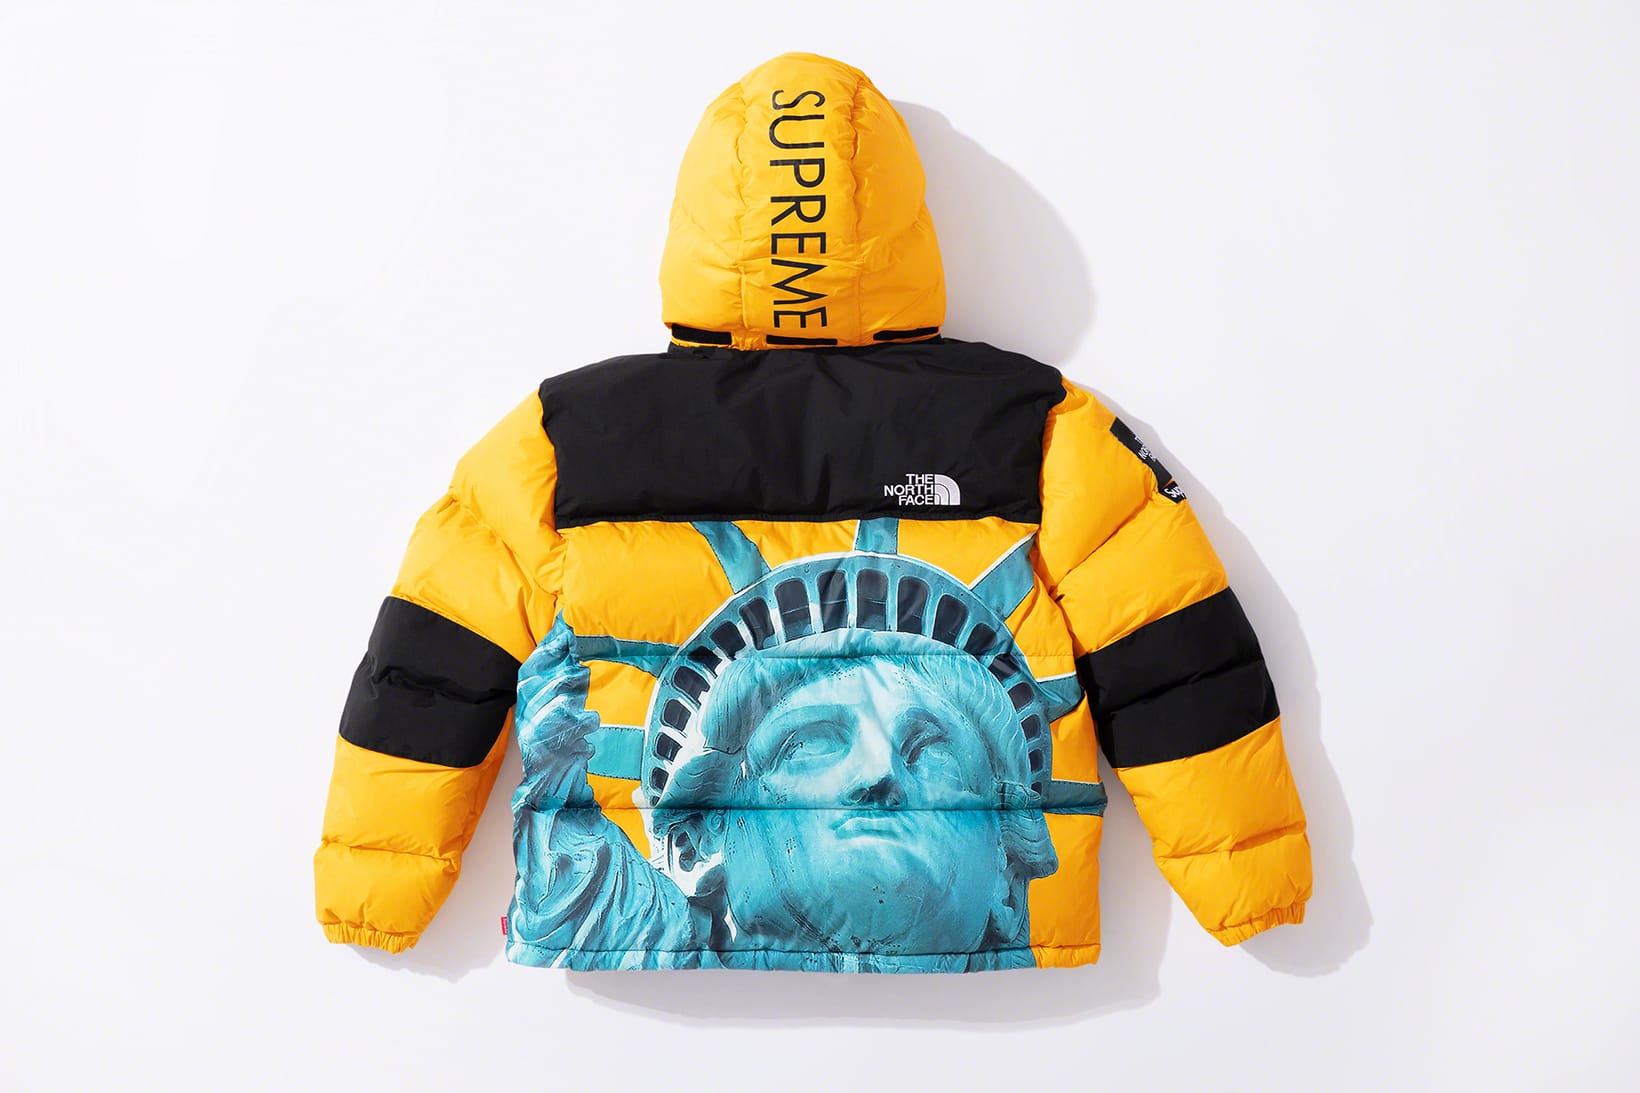 the north face supreme jacket yellow